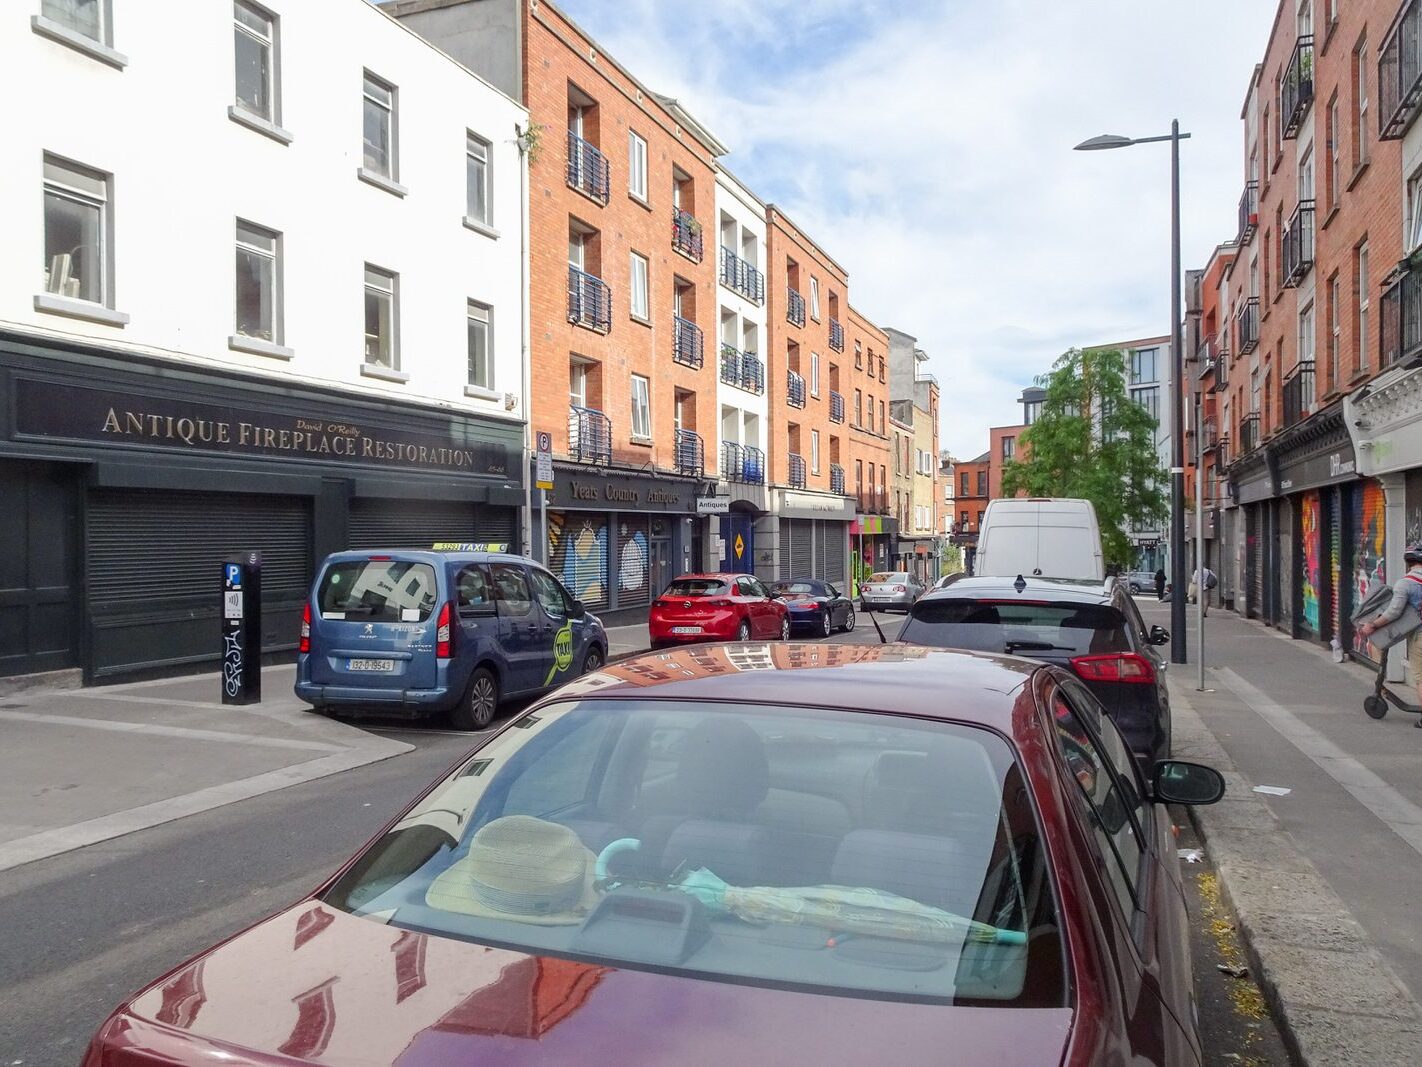 THE FRANCIS STREET UPGRADE HAS BEEN A HUGE A SUCCESS [MEATH STREET IS NEXT FOR AN UPGRADE]-236800-1